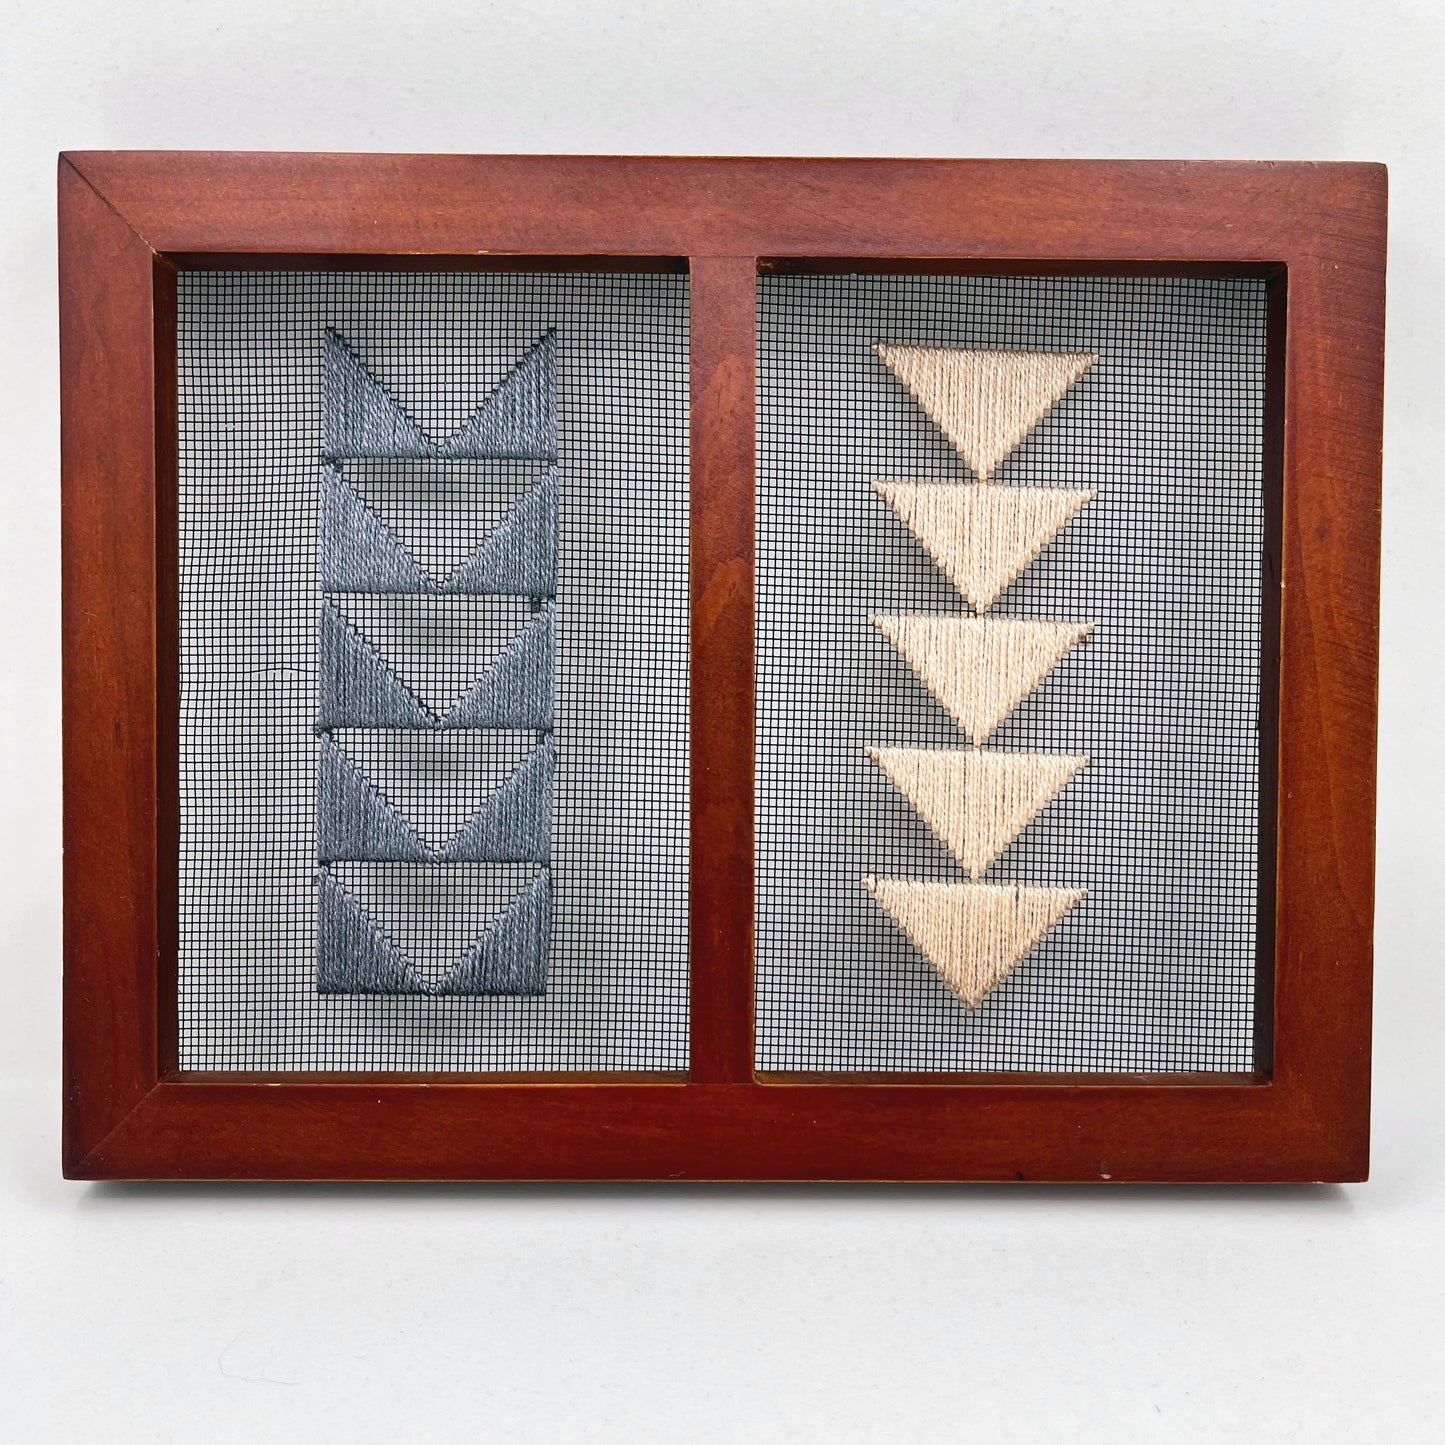 Small double panel wood frame holding window screen hand stitched with peach and grey triangles that form shapes of flying geese quilt pattern, on the left side a column of the border triangles in grey, on the right side the center triangles in peach